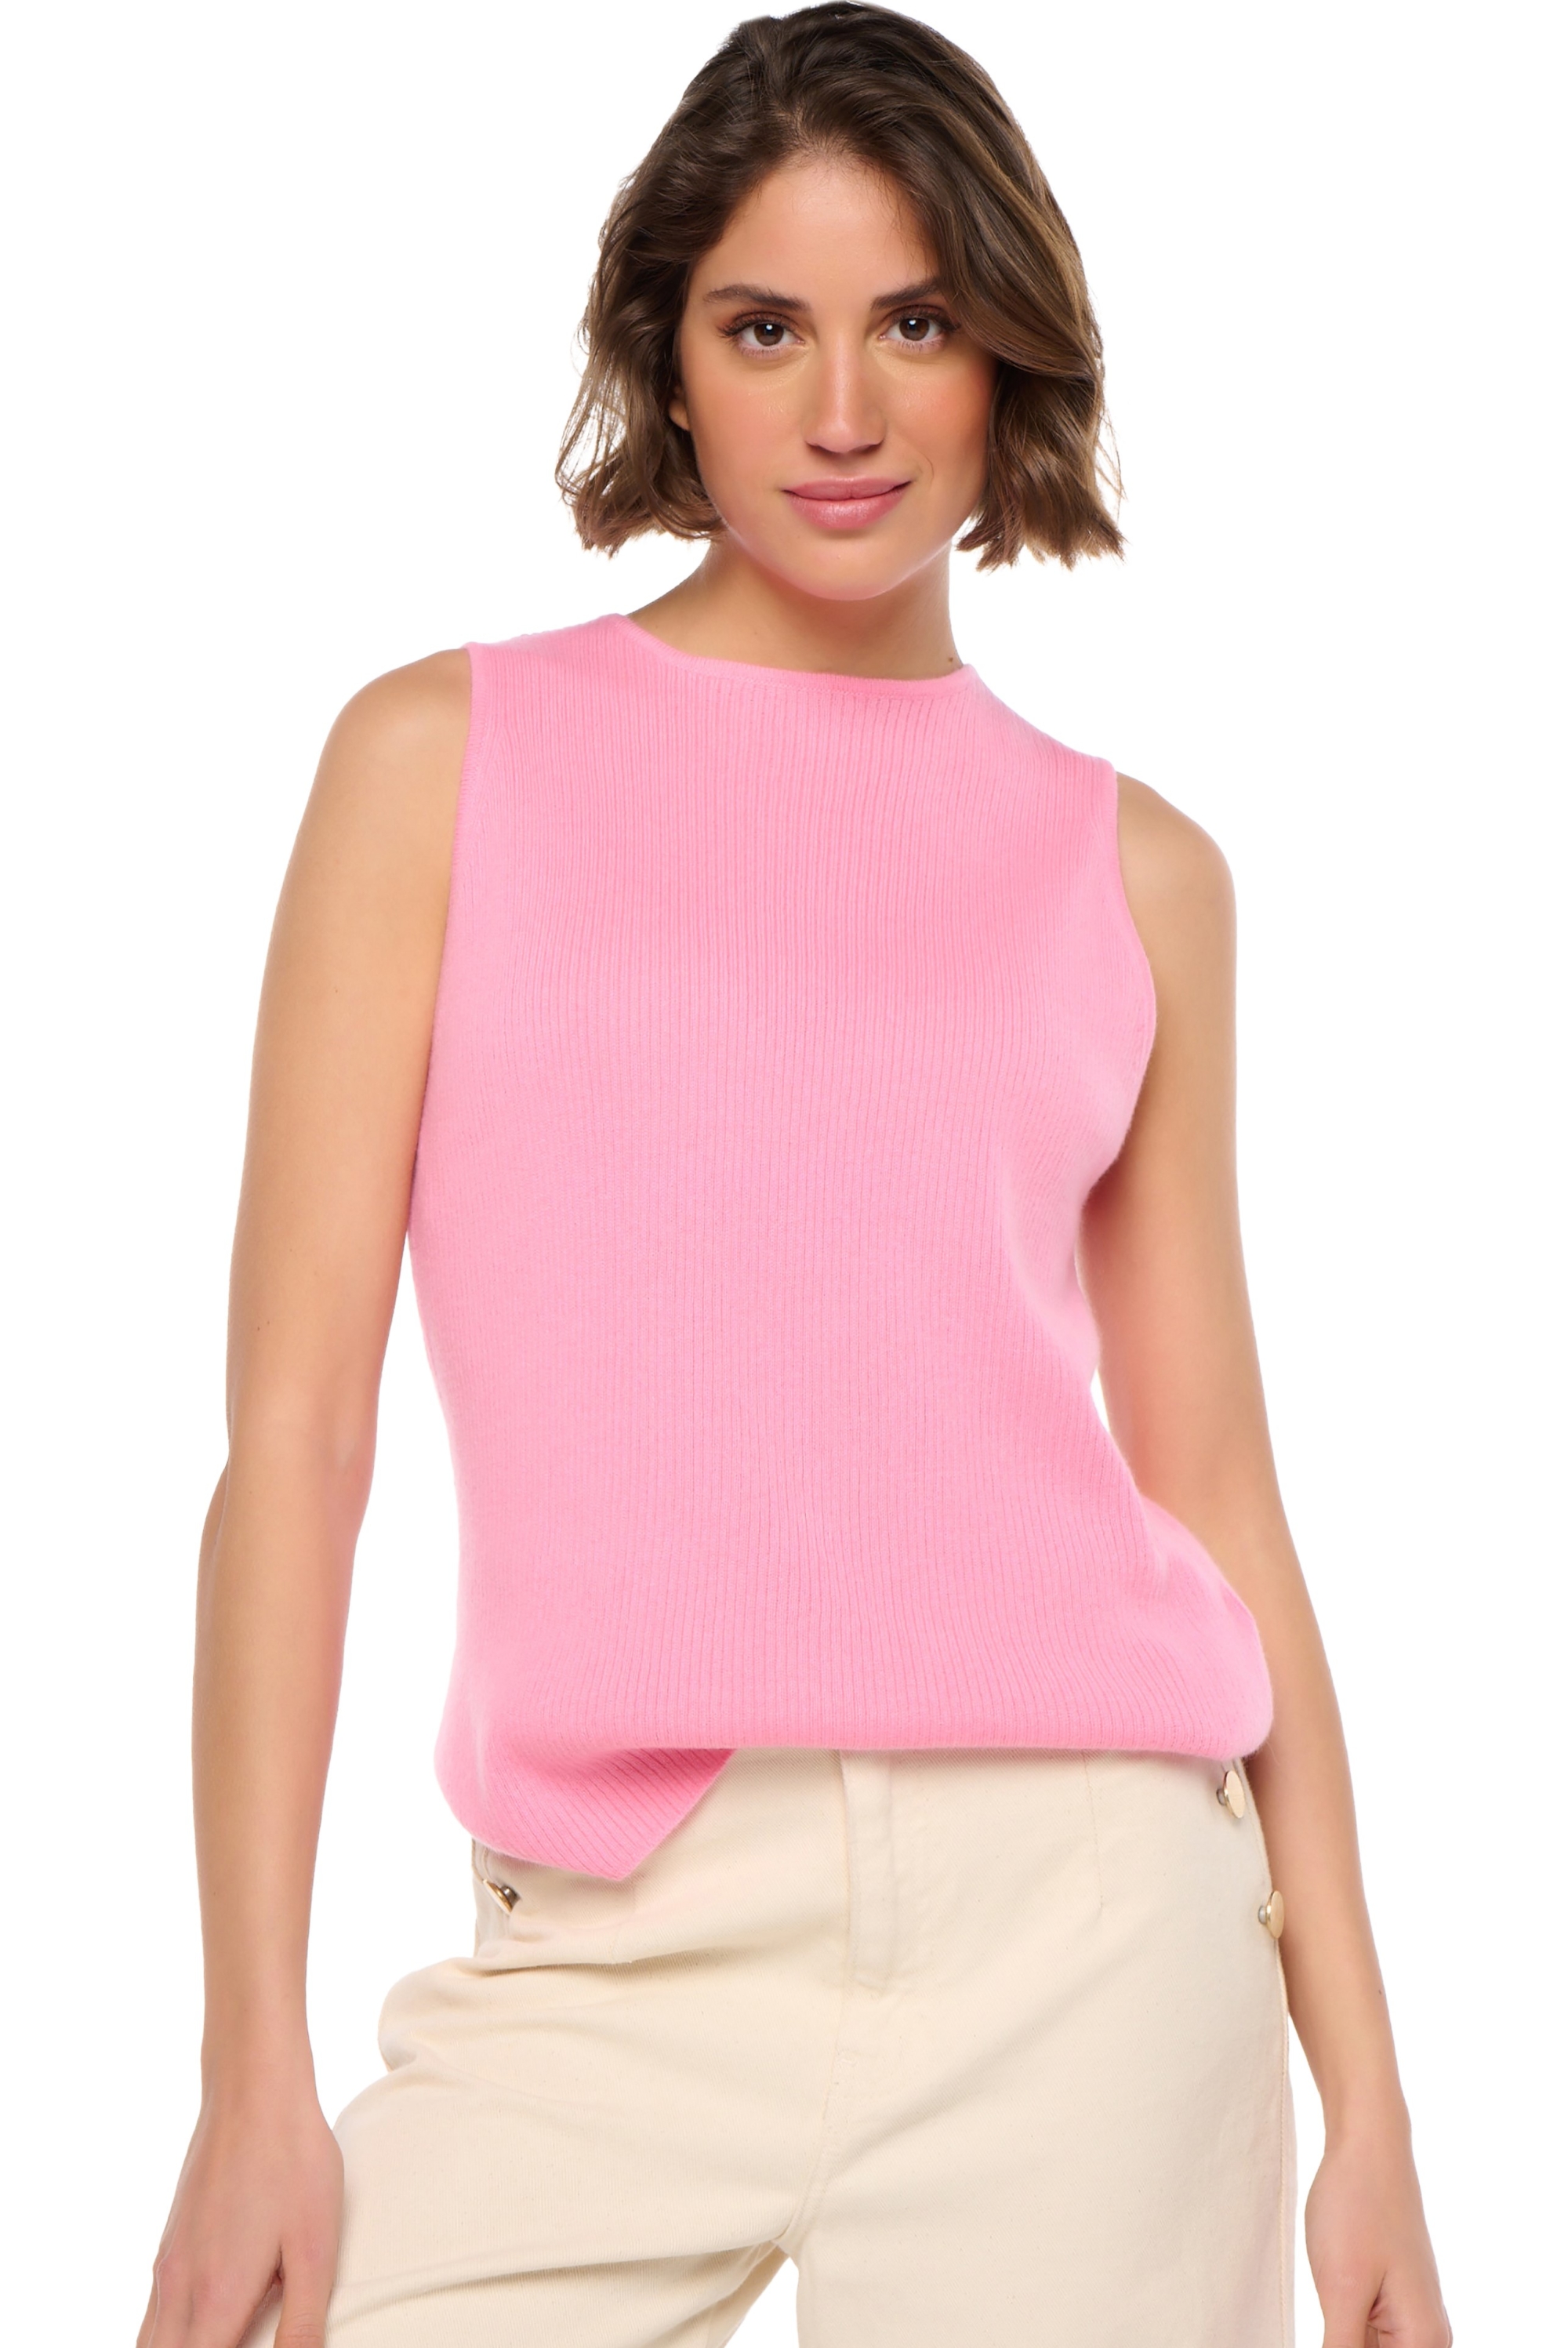 Cachemire pull femme col rond vuppia strawberry ice s